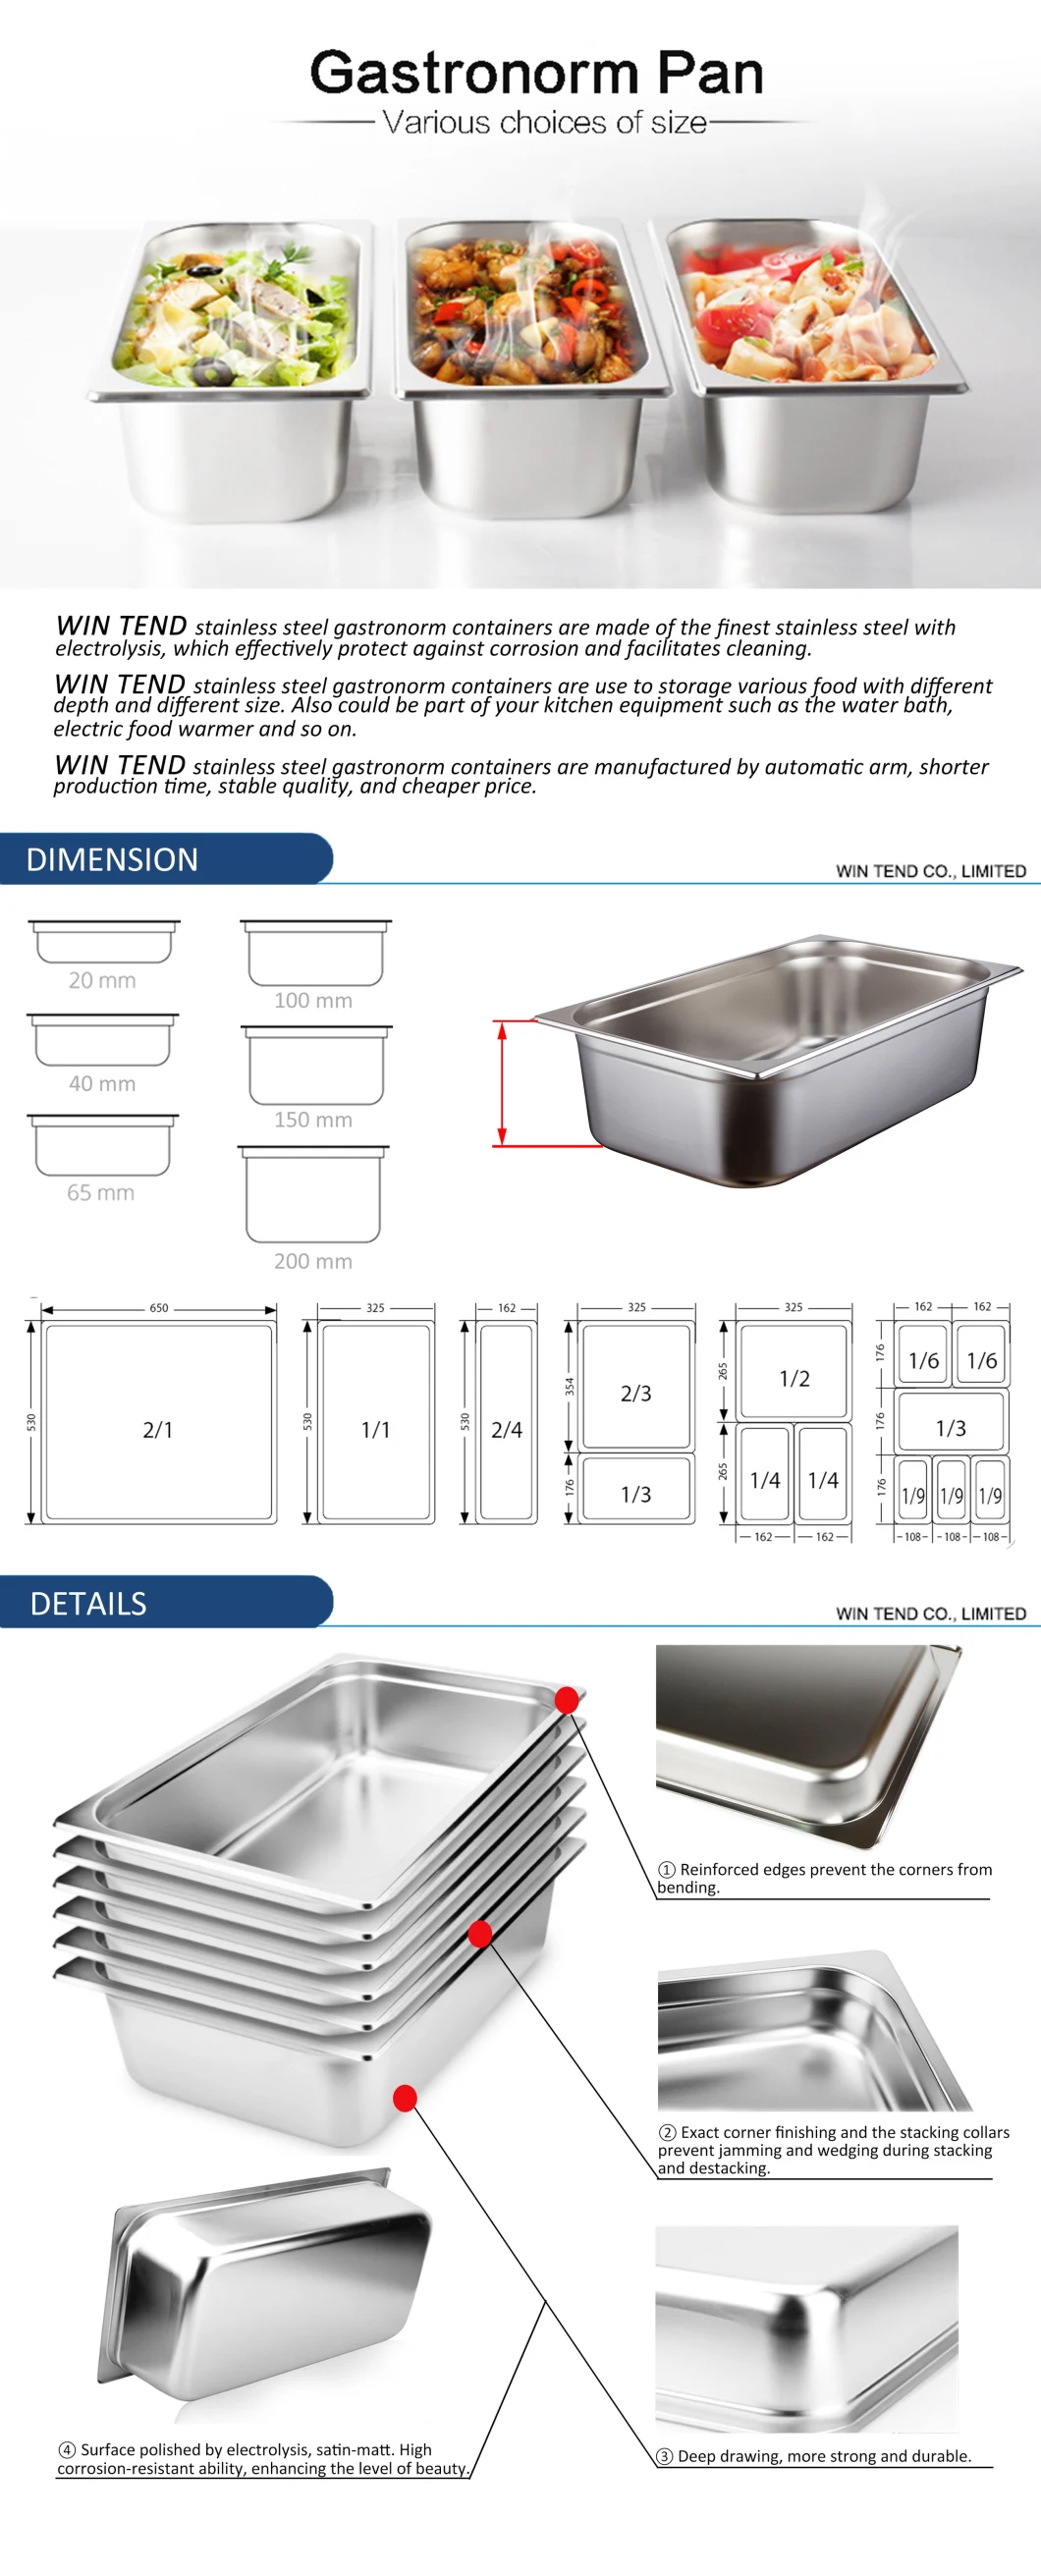 Us Straight Body 1/4 Stainless Steel Food Container Gn Pan Tray for Kitchen